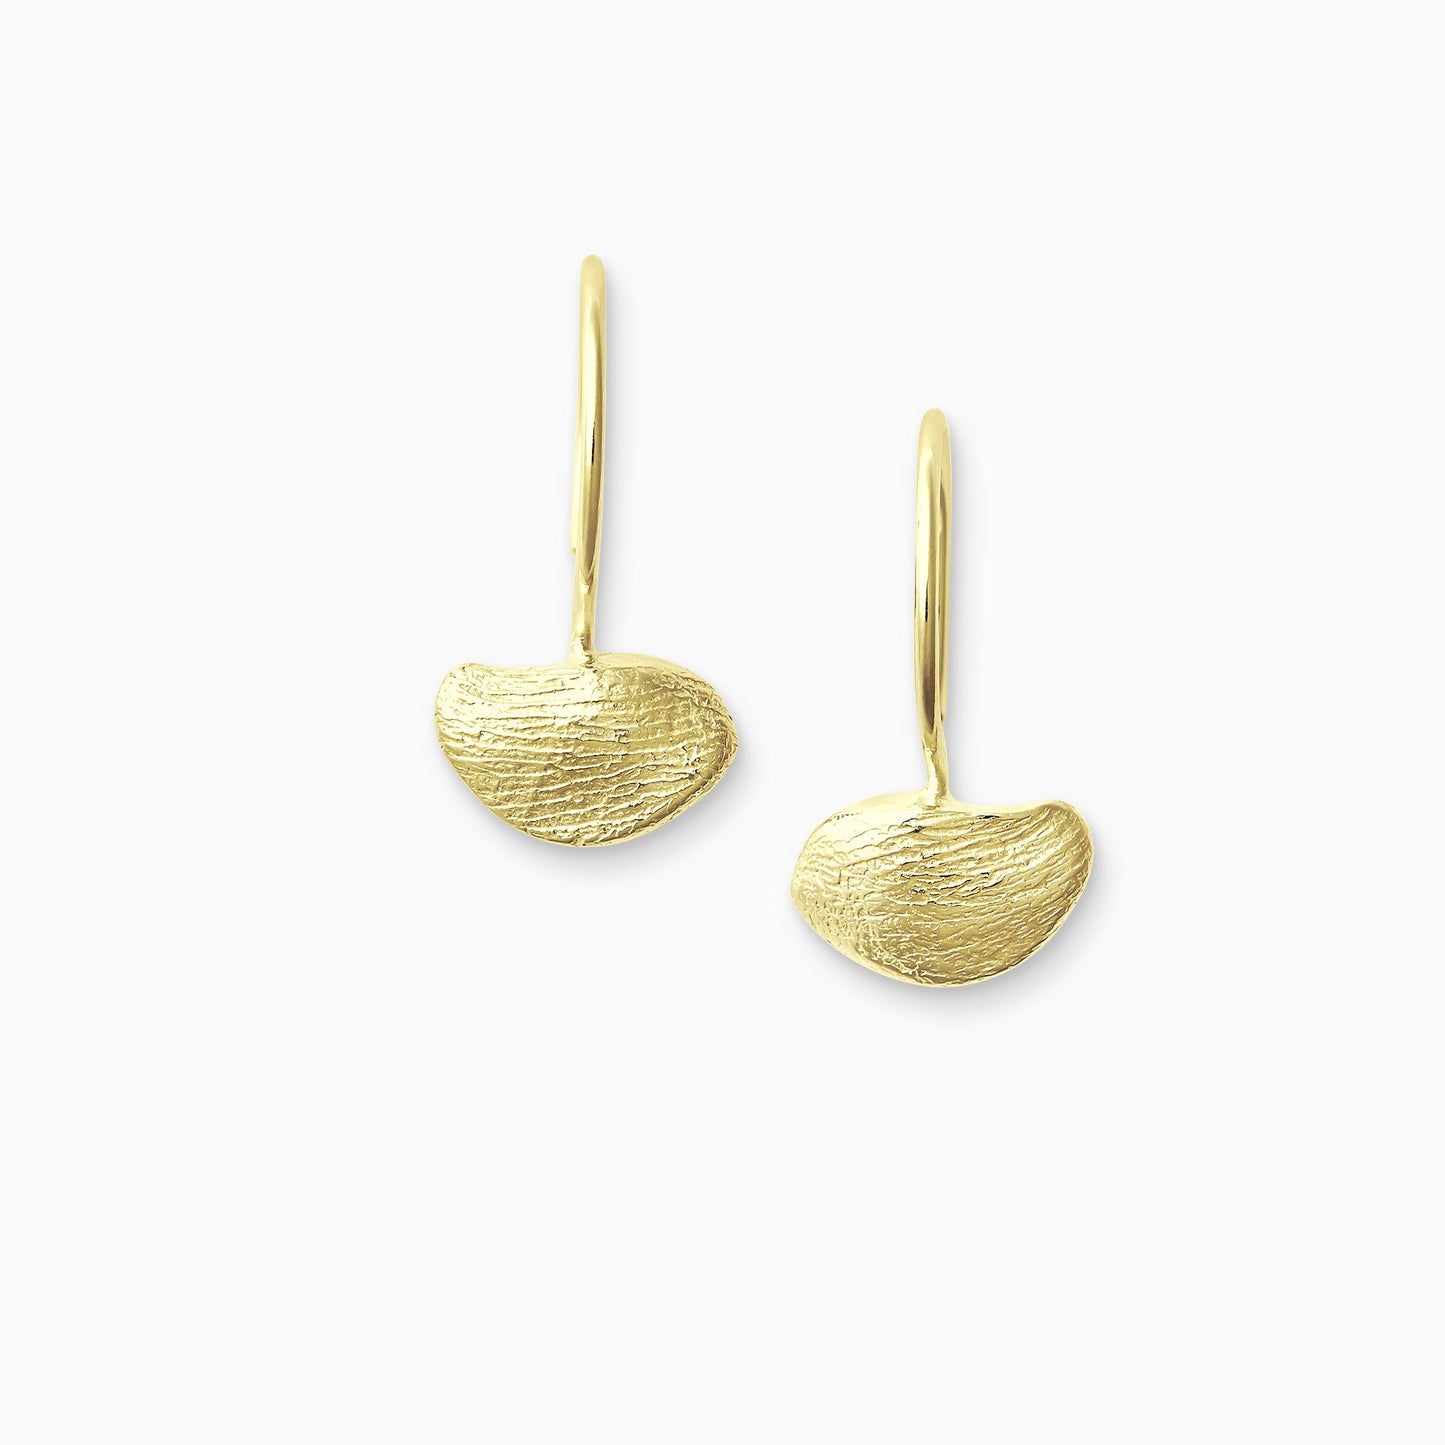 A pair of 18ct Fairtrade yellow gold drop hoop earrings with a hoop fastening. Strong texture and irregular form. 22mm x 12mm plus round hoop ear wire